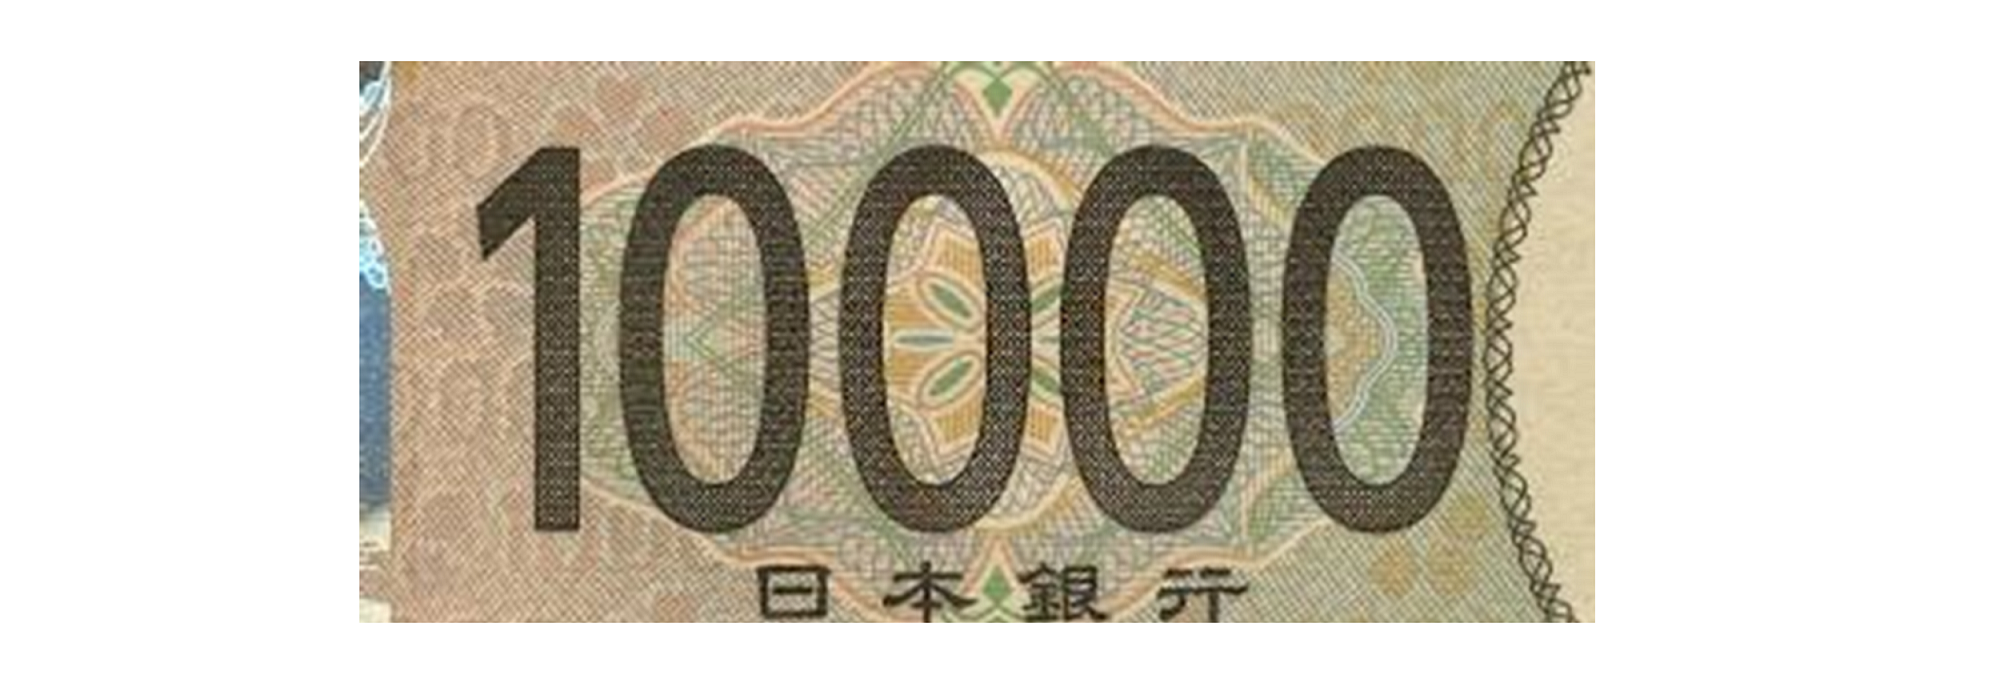 Image of the raised print numerals indicating the face value of the 10,000 yen note. These are printed on the center left of the front of the note.